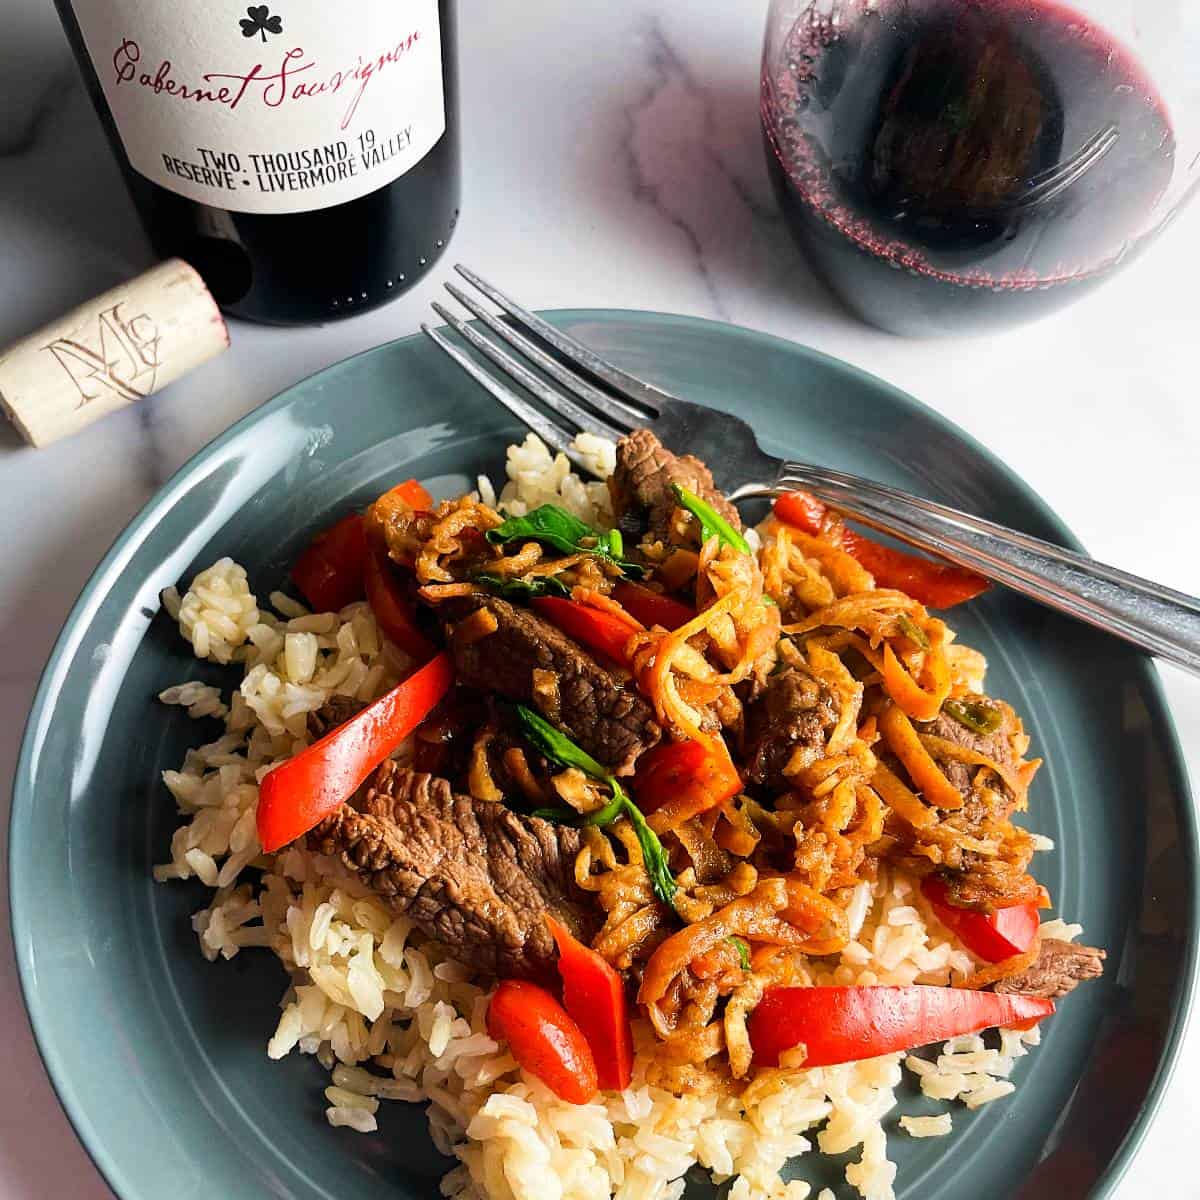 steak and vegetable stir-fry, including slices of red bell pepper, on a gray plate. Served with a red wine.